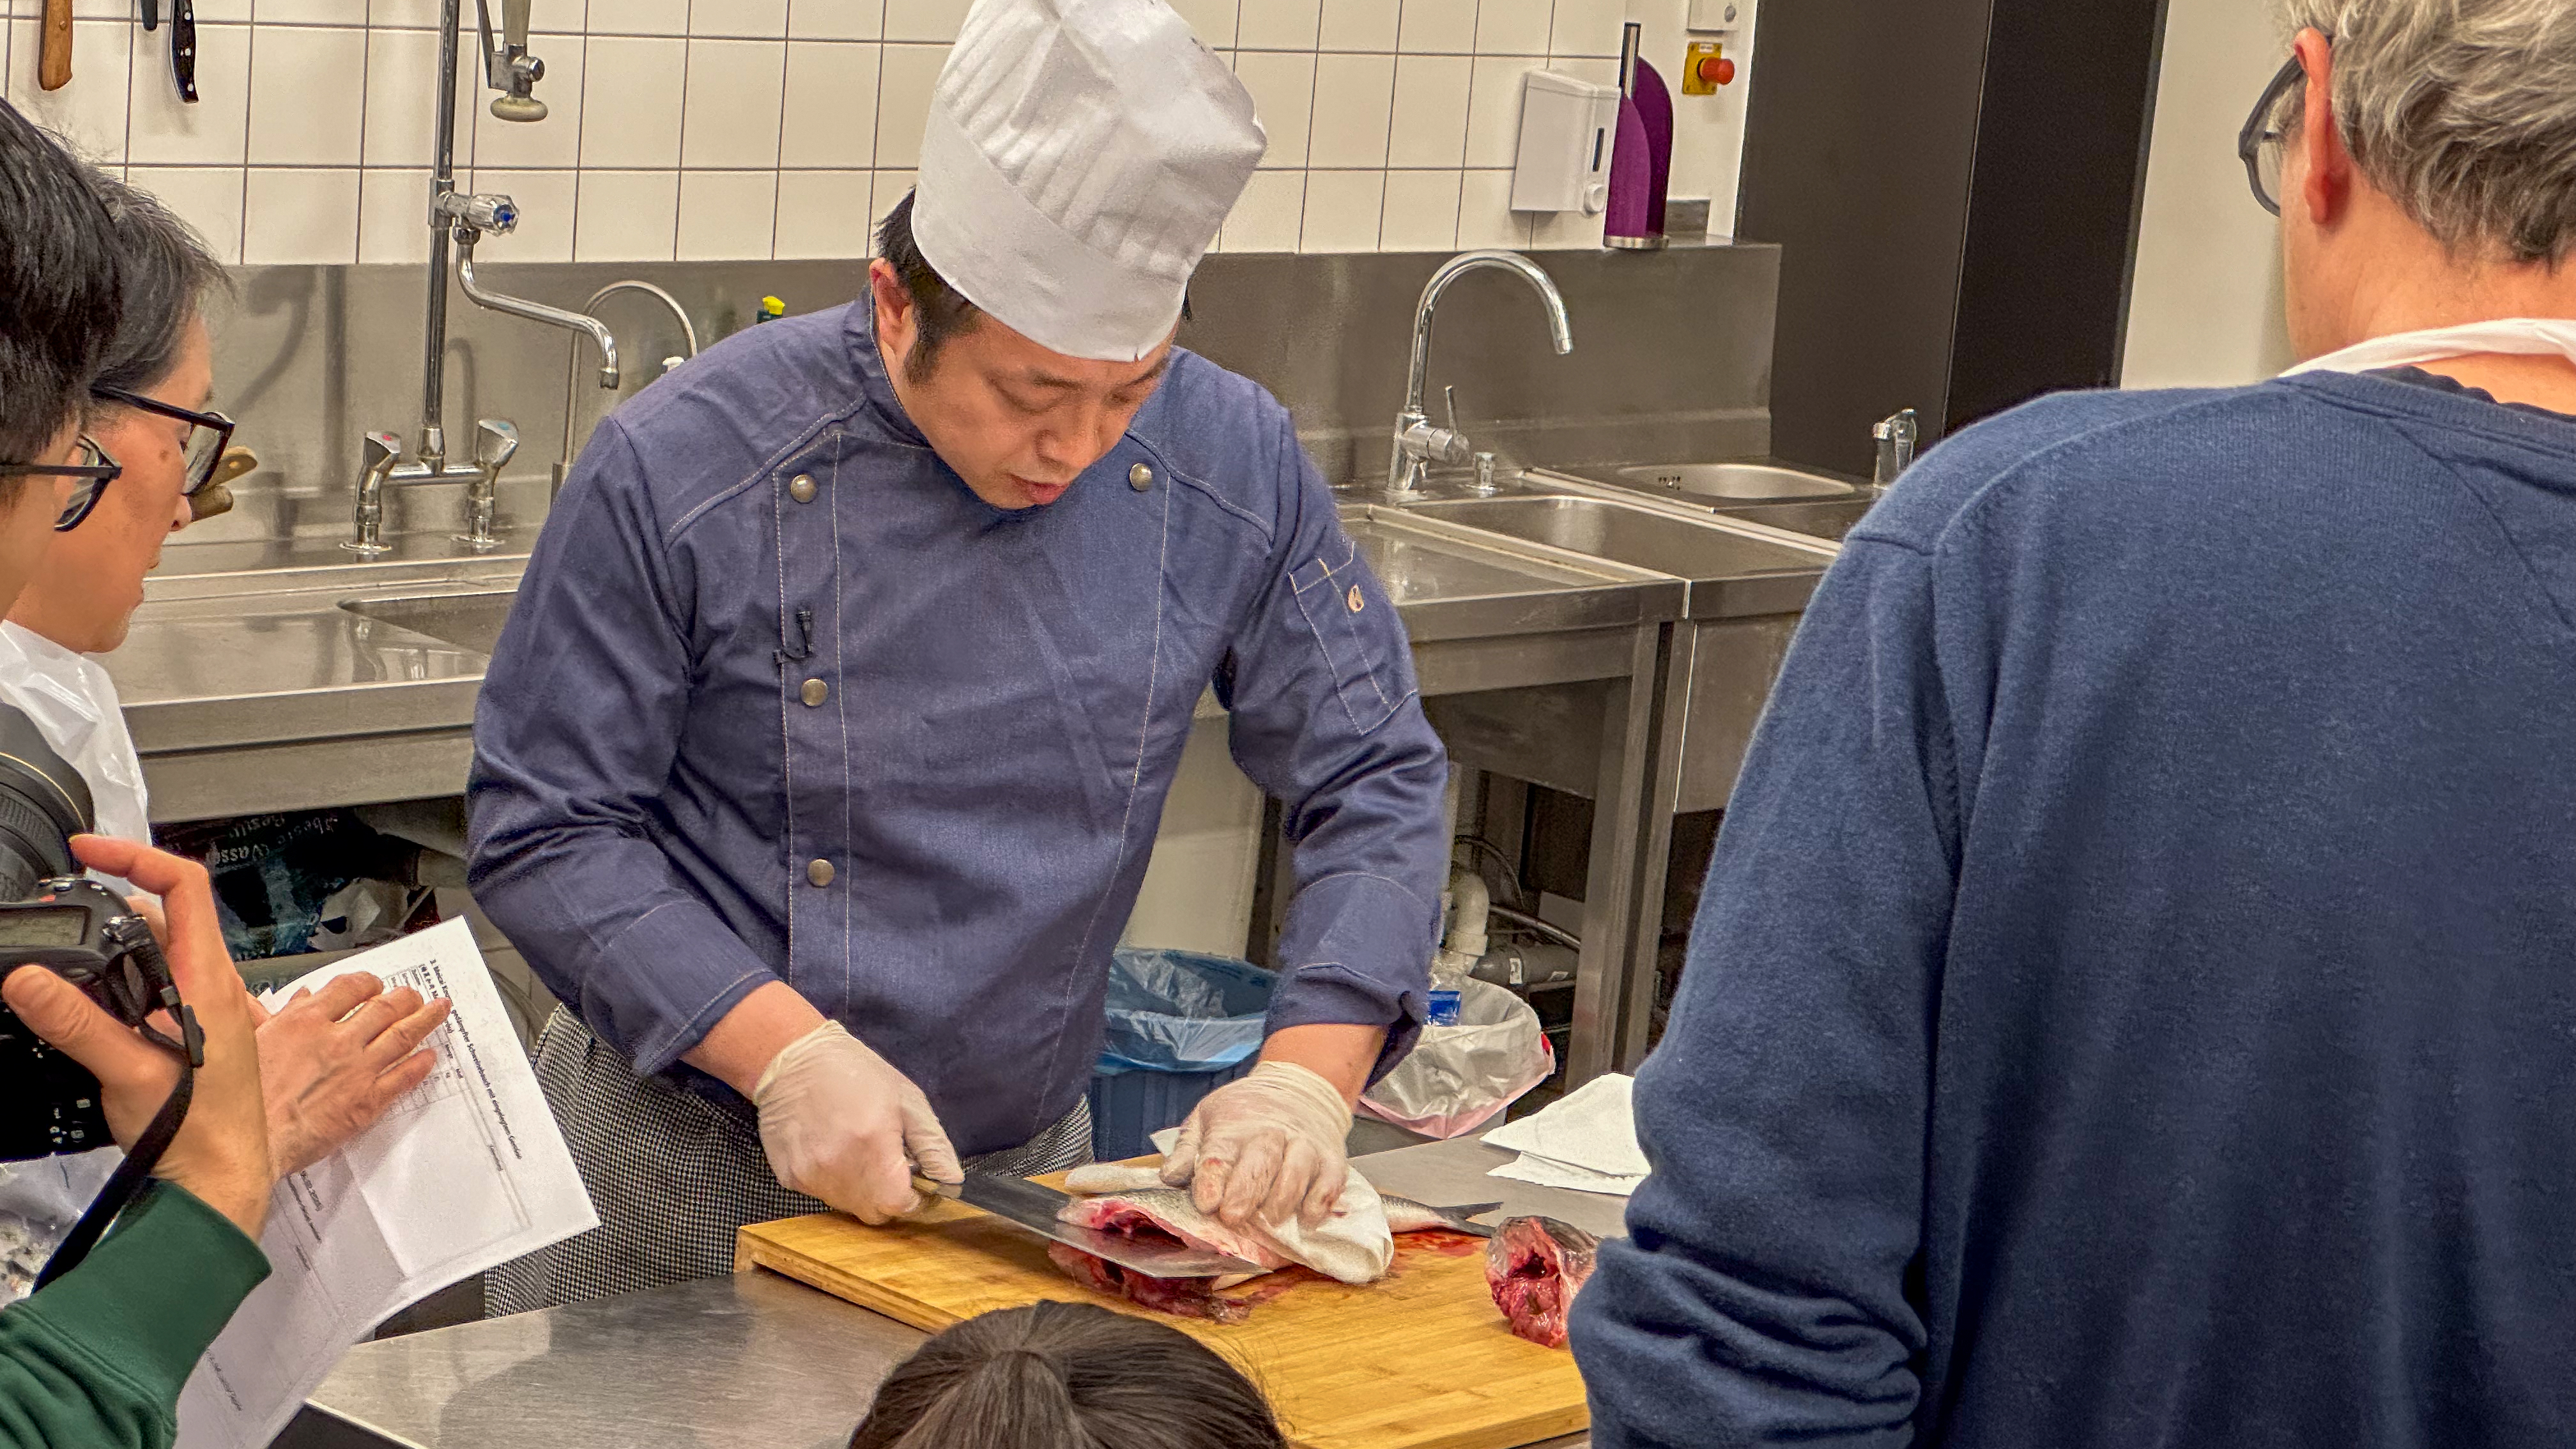 Attendees at Berlin's Chinese Culture Centre watch a chef prepare dishes. /CGTN